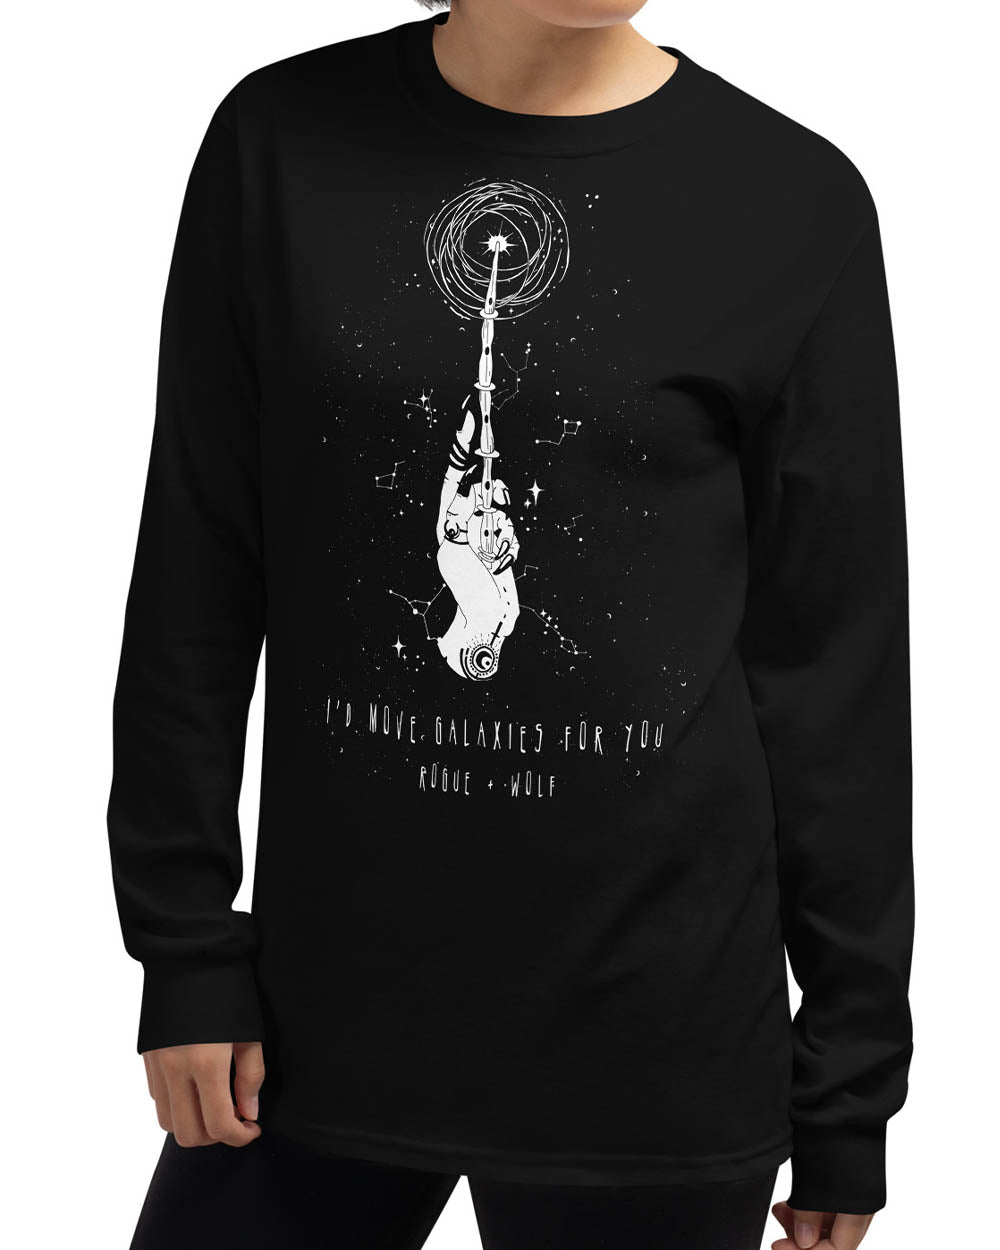 Cosmic Devotion Long Sleeve Tee - Unisex & Vegan Alt Goth Witchy Top Grunge Aesthetic Fashion Cool Gothic gifts